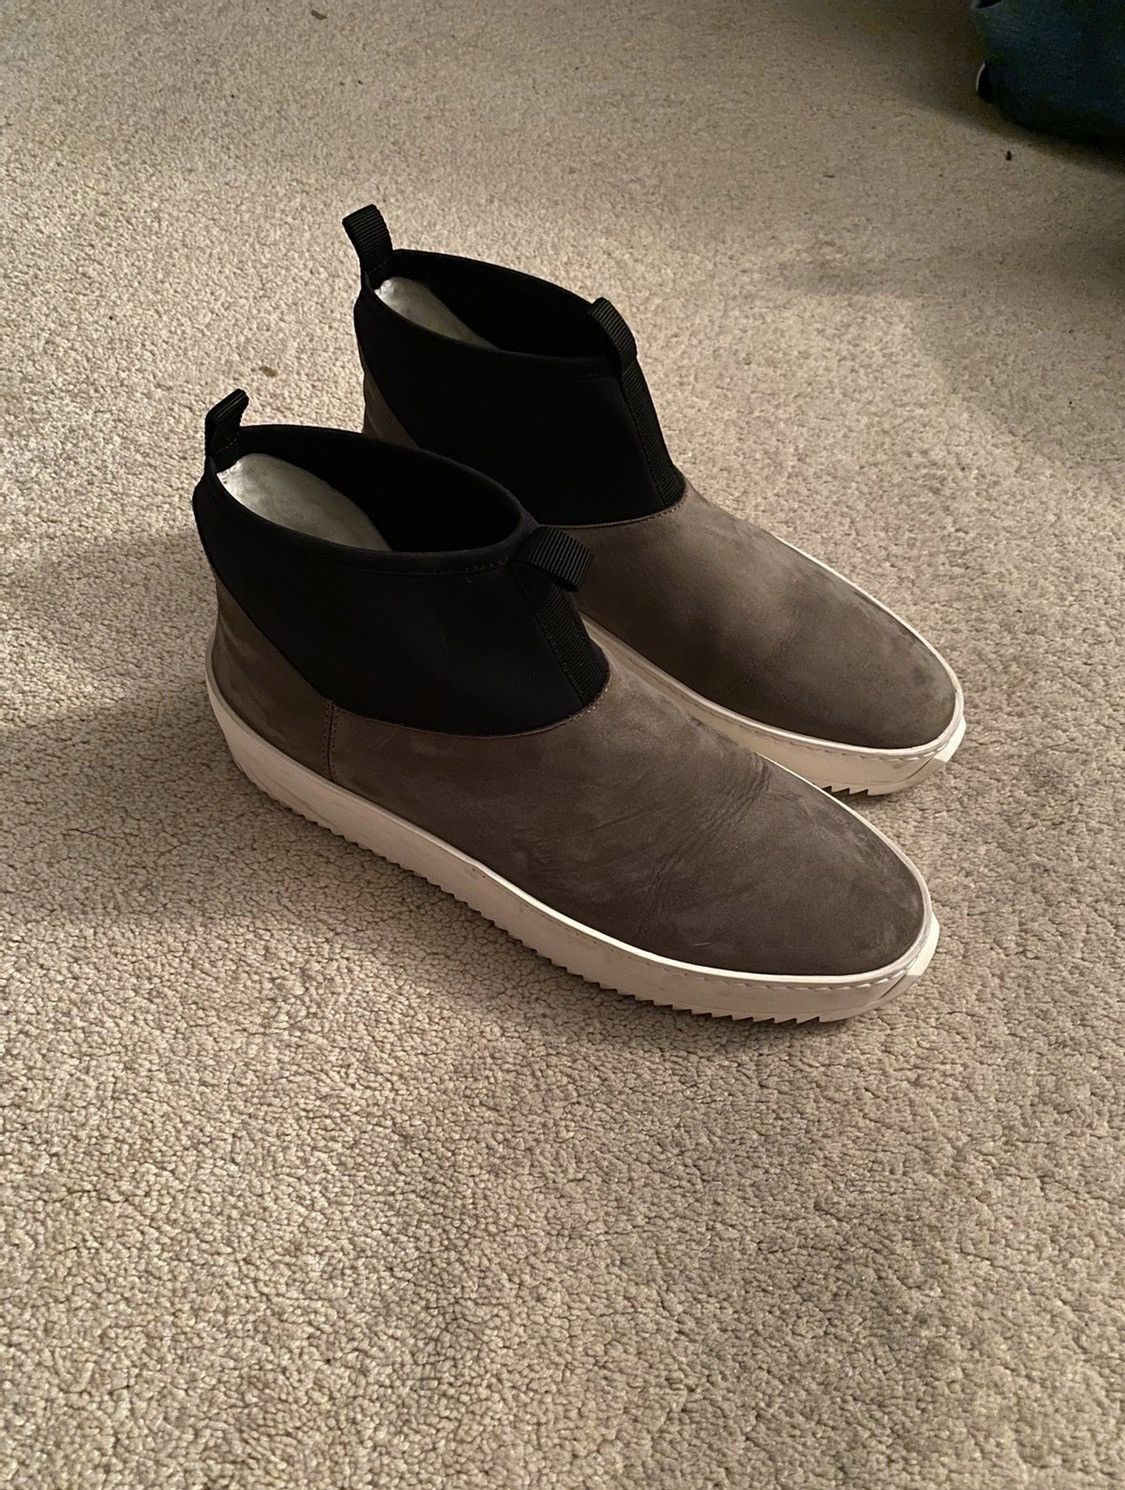 Fear of God Sixth collection Polar wolf boot | Grailed